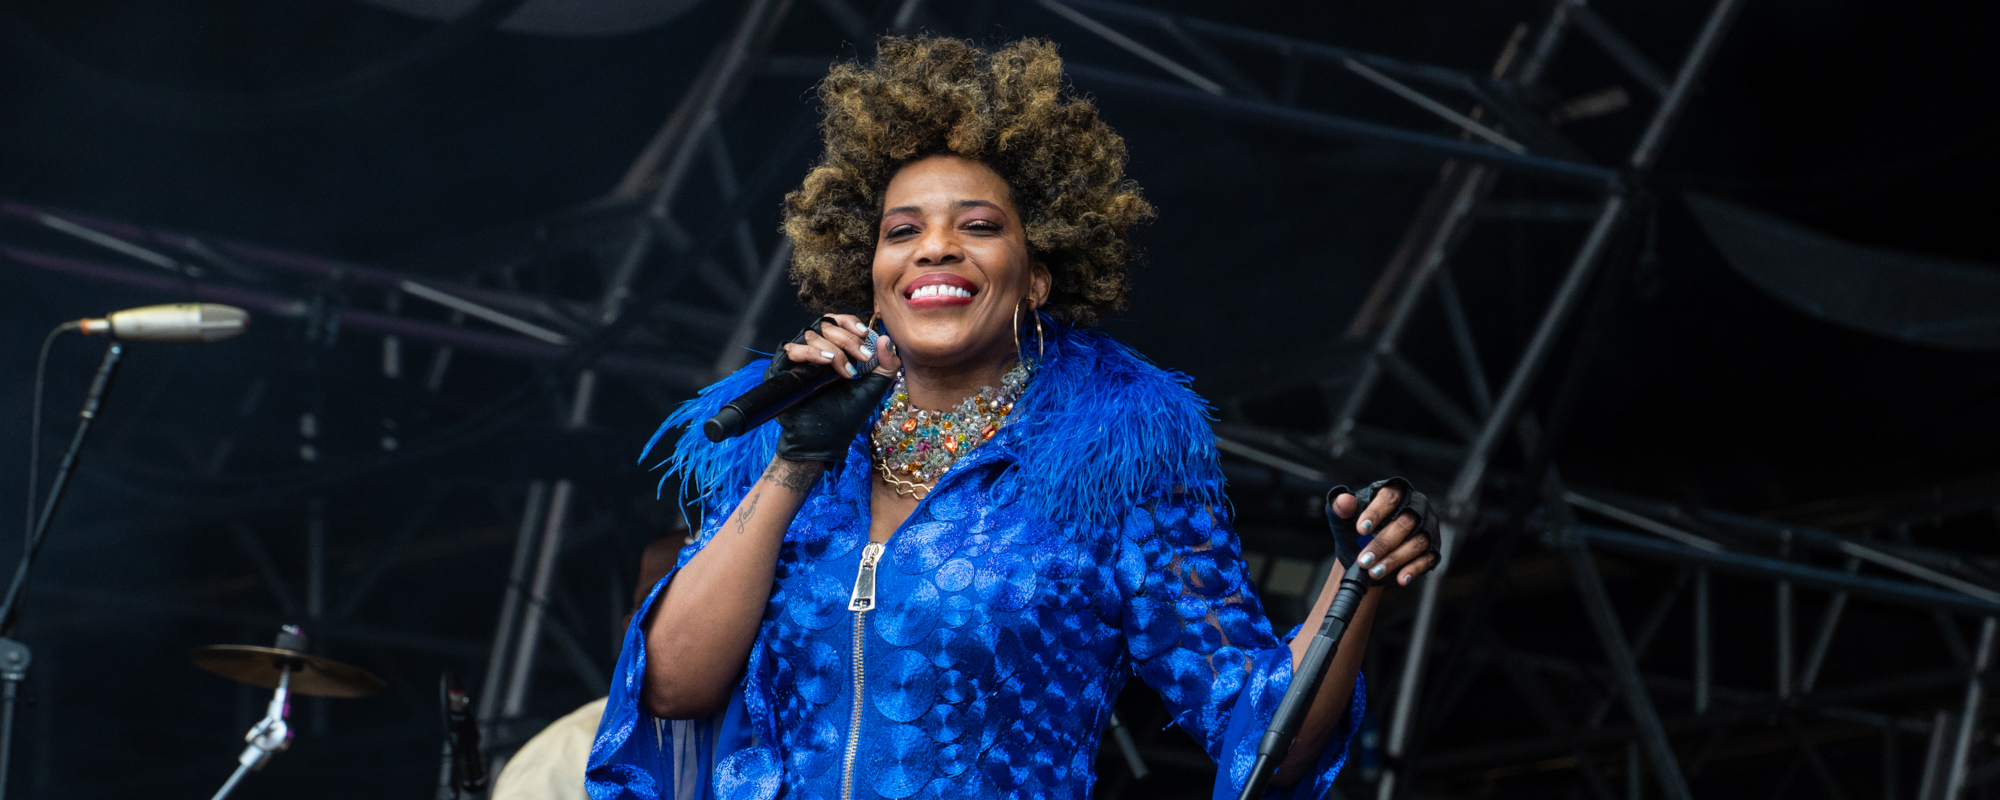 Where Are They Now? Macy Gray